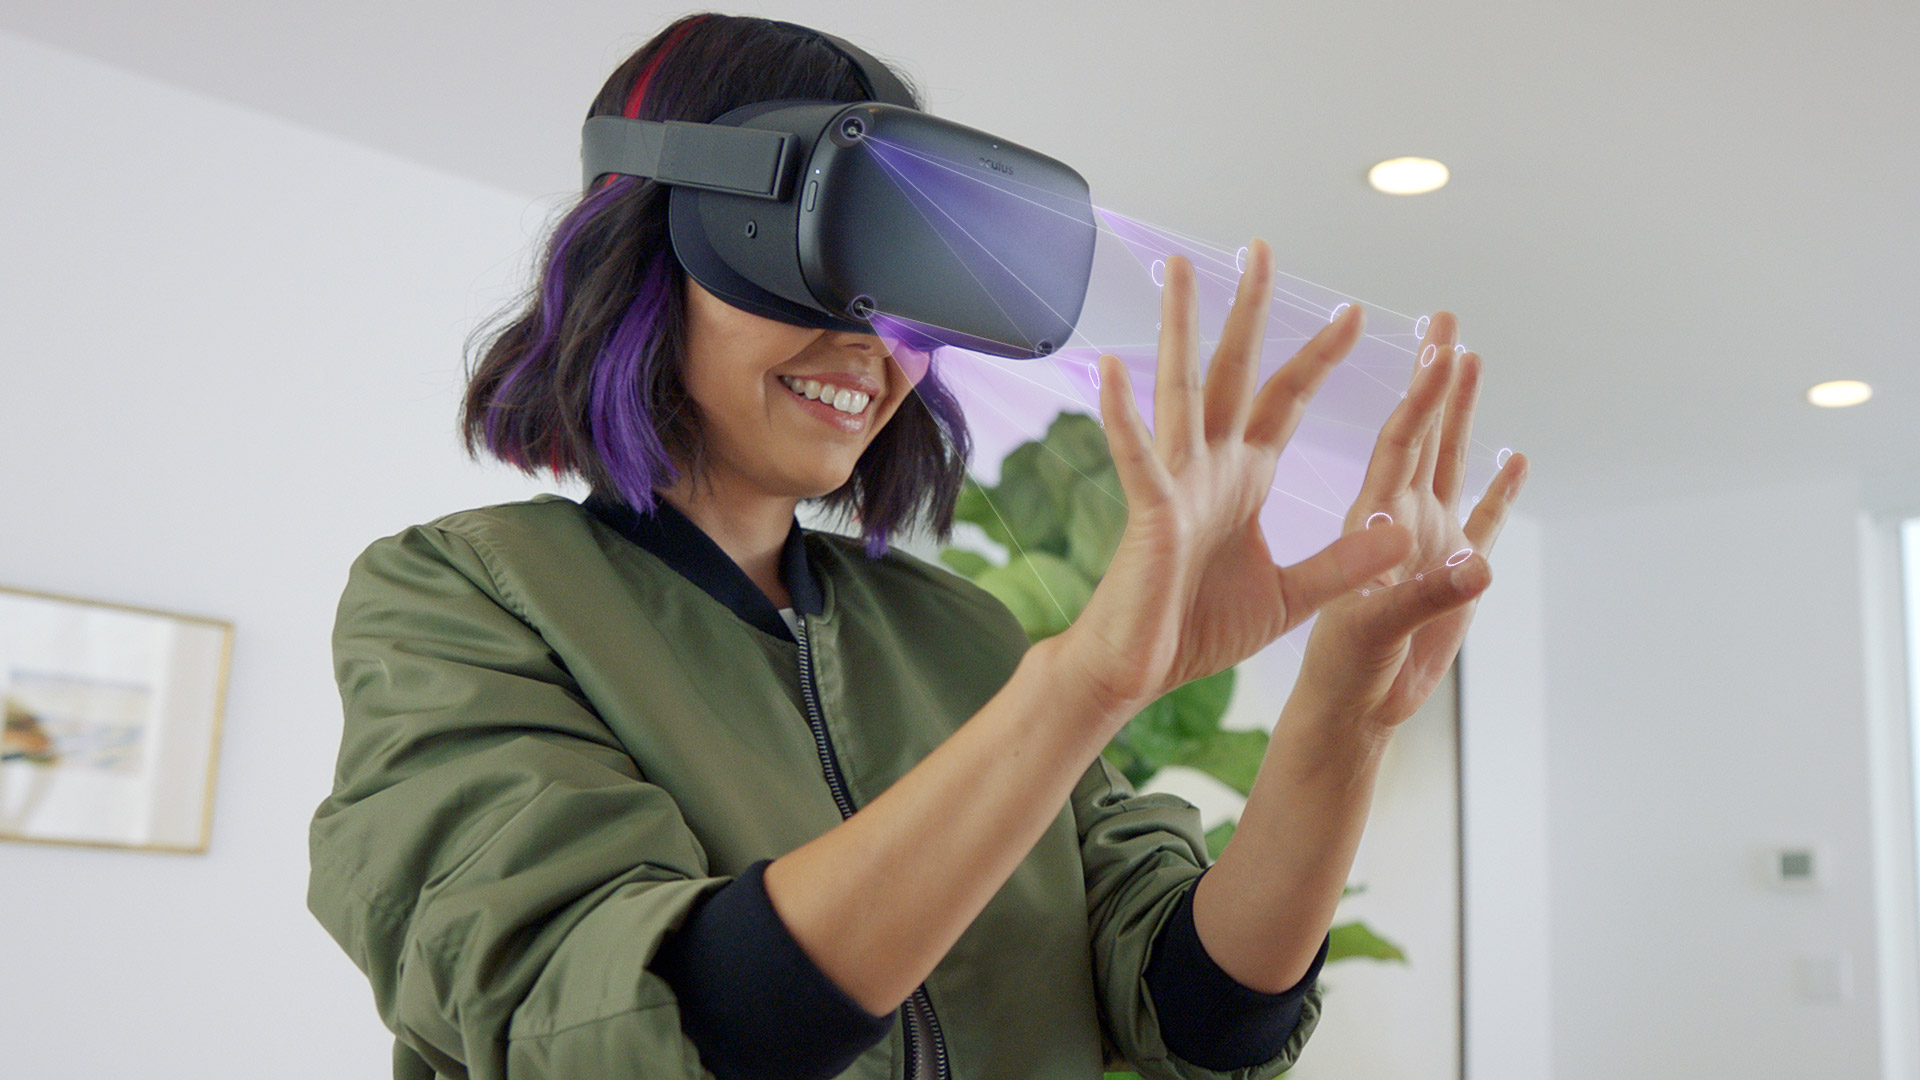 oculus quest hand tracking games